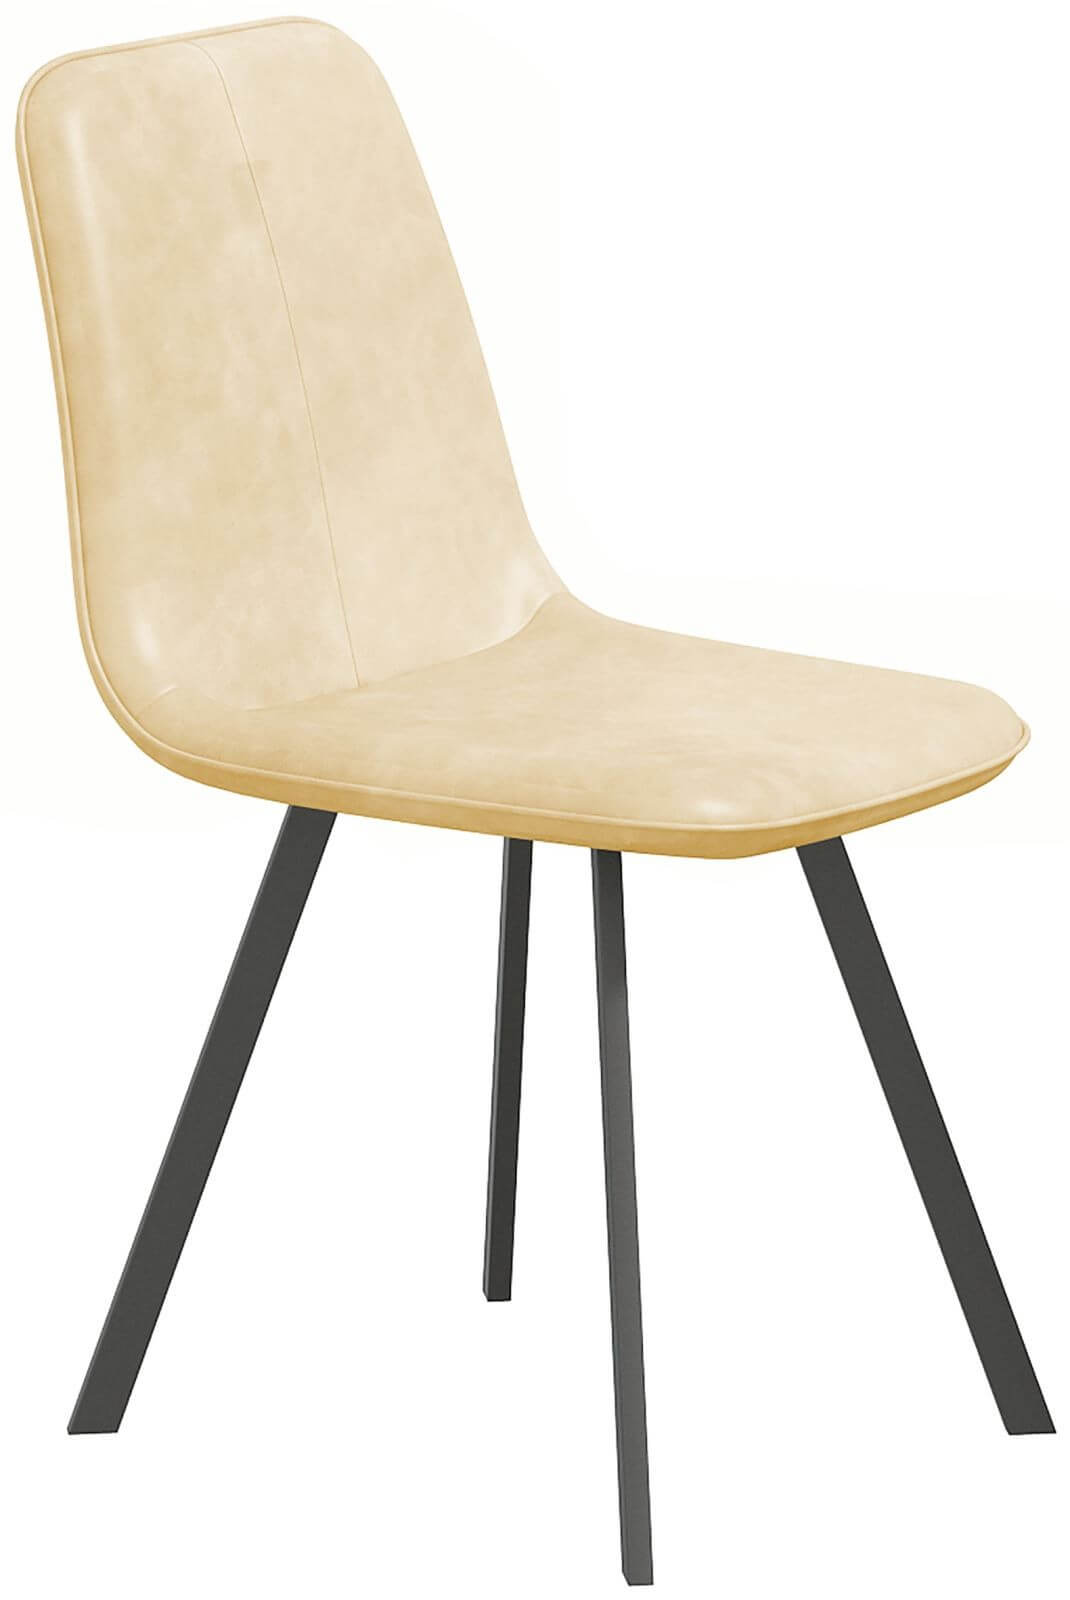 Showing image for Detroit dining chair